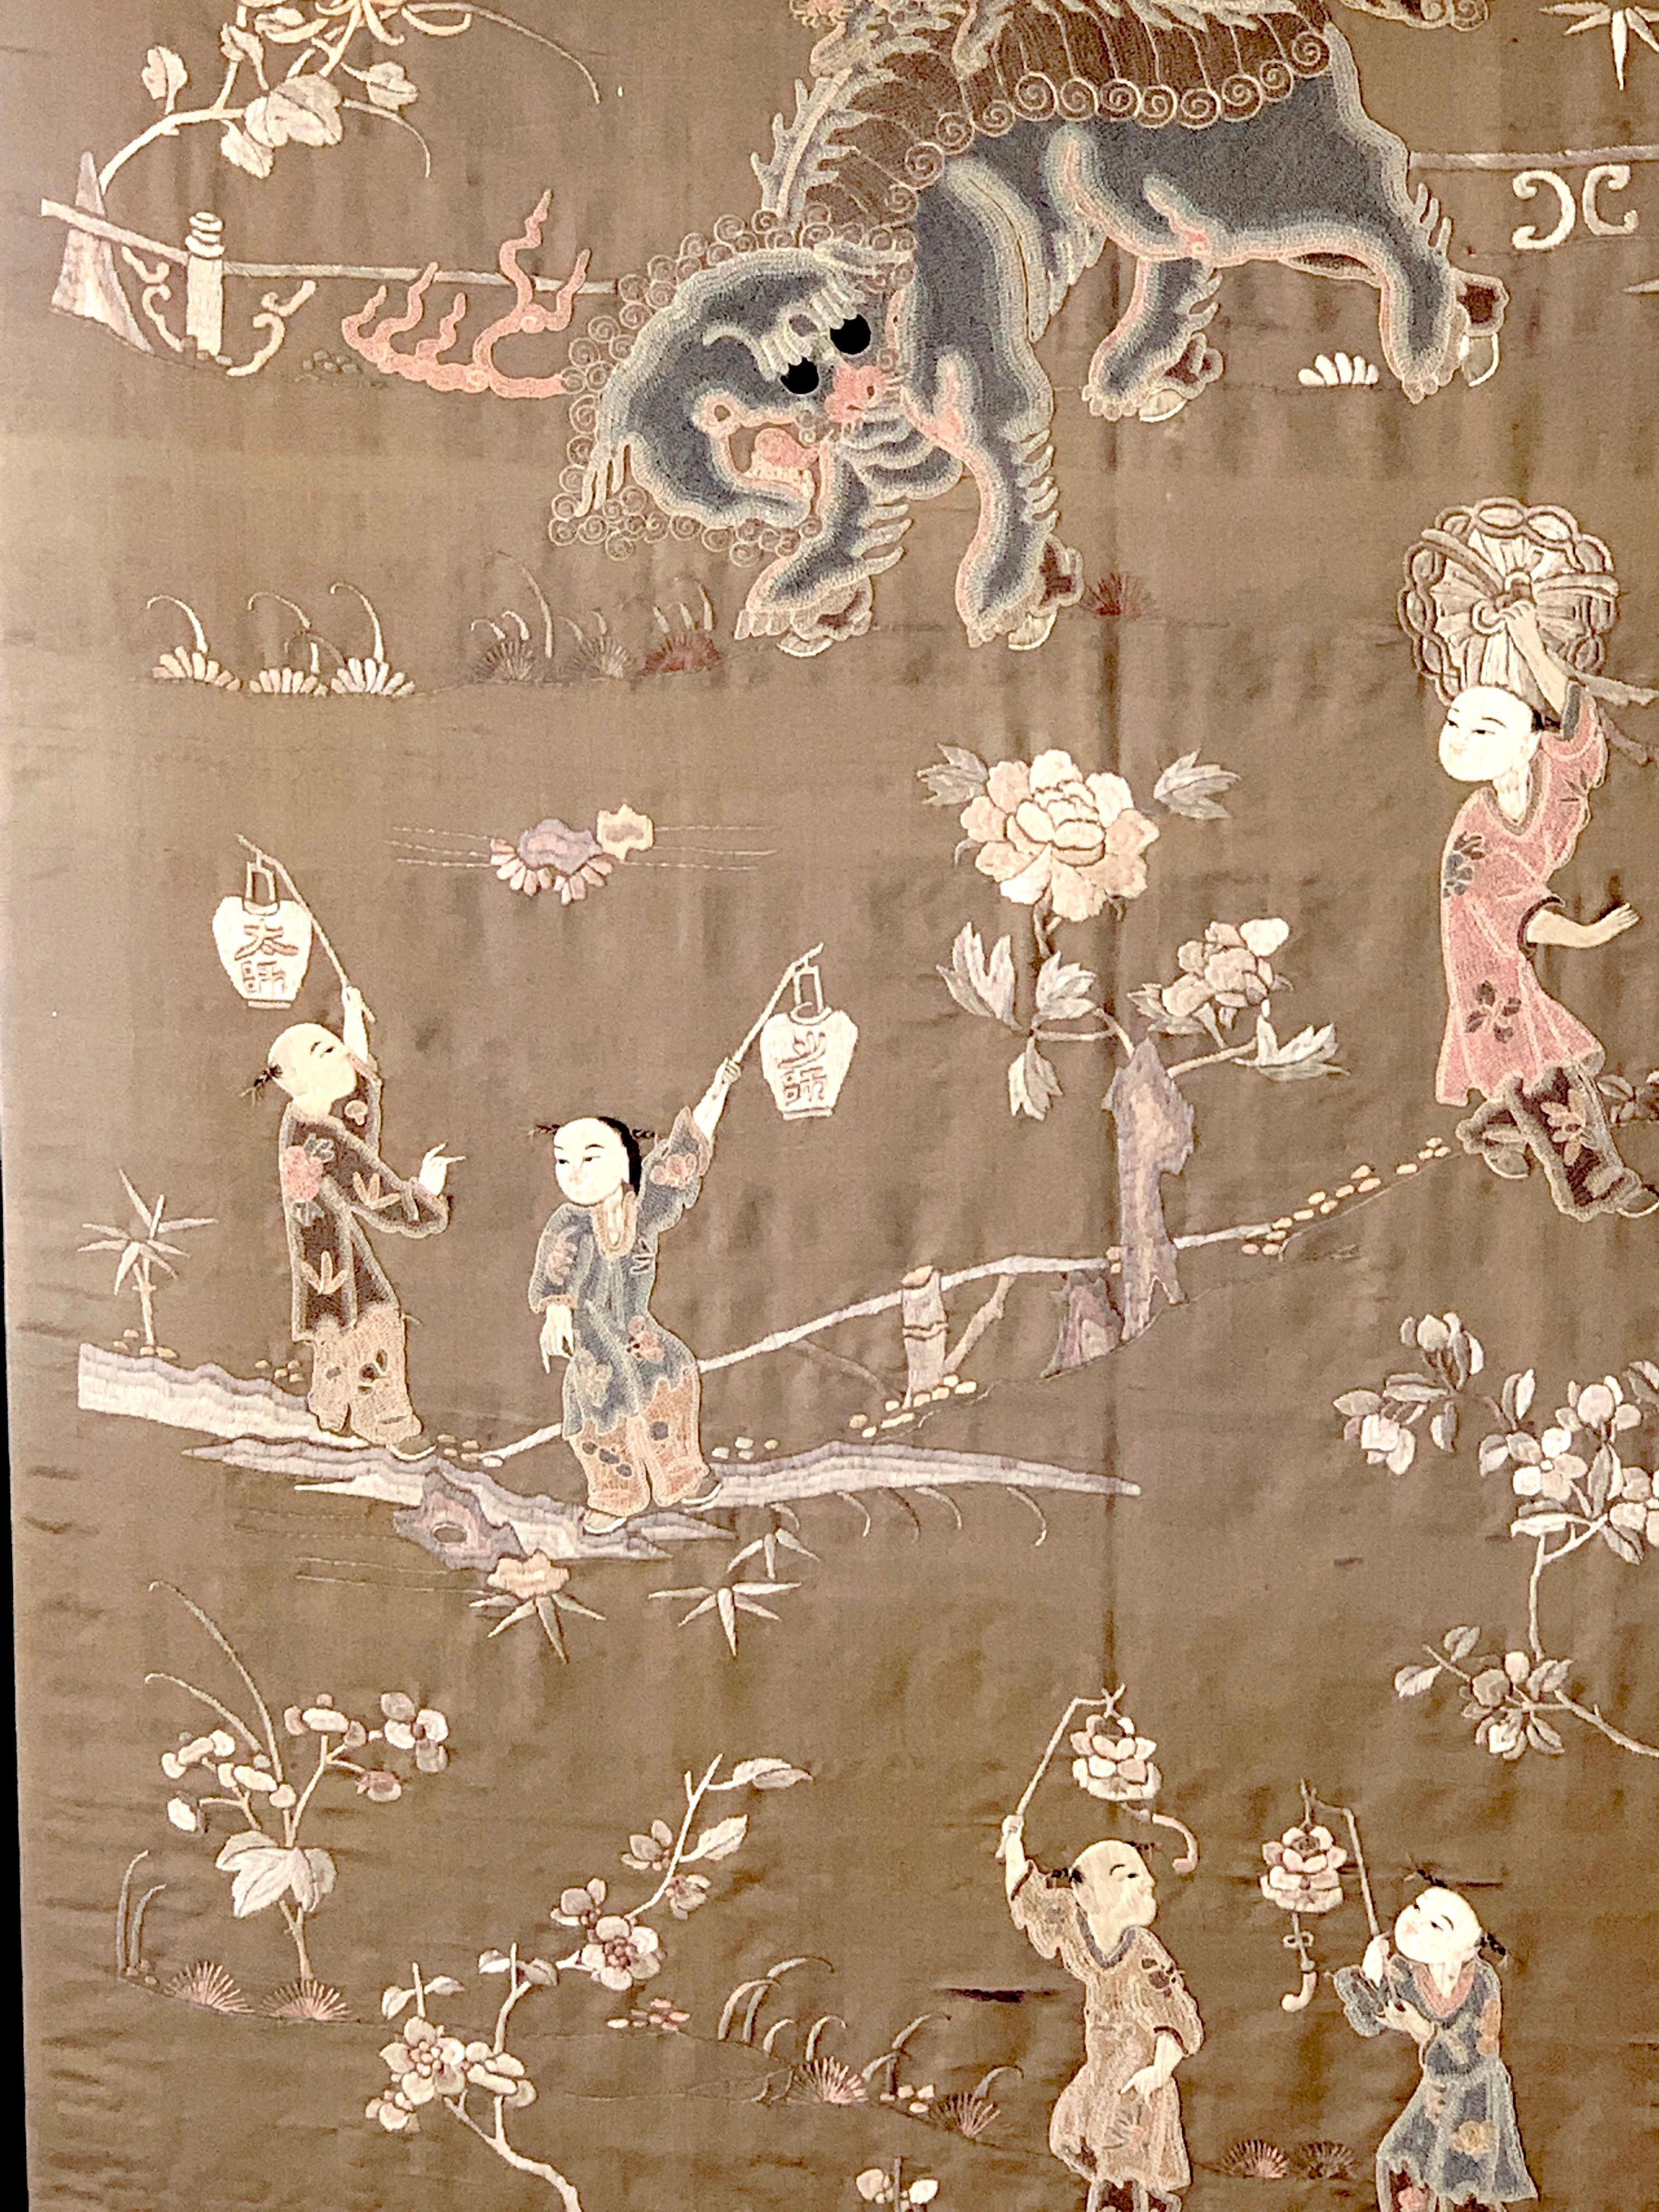 20th Century Exquisite Chinese Export Landscape Silk Embroidery